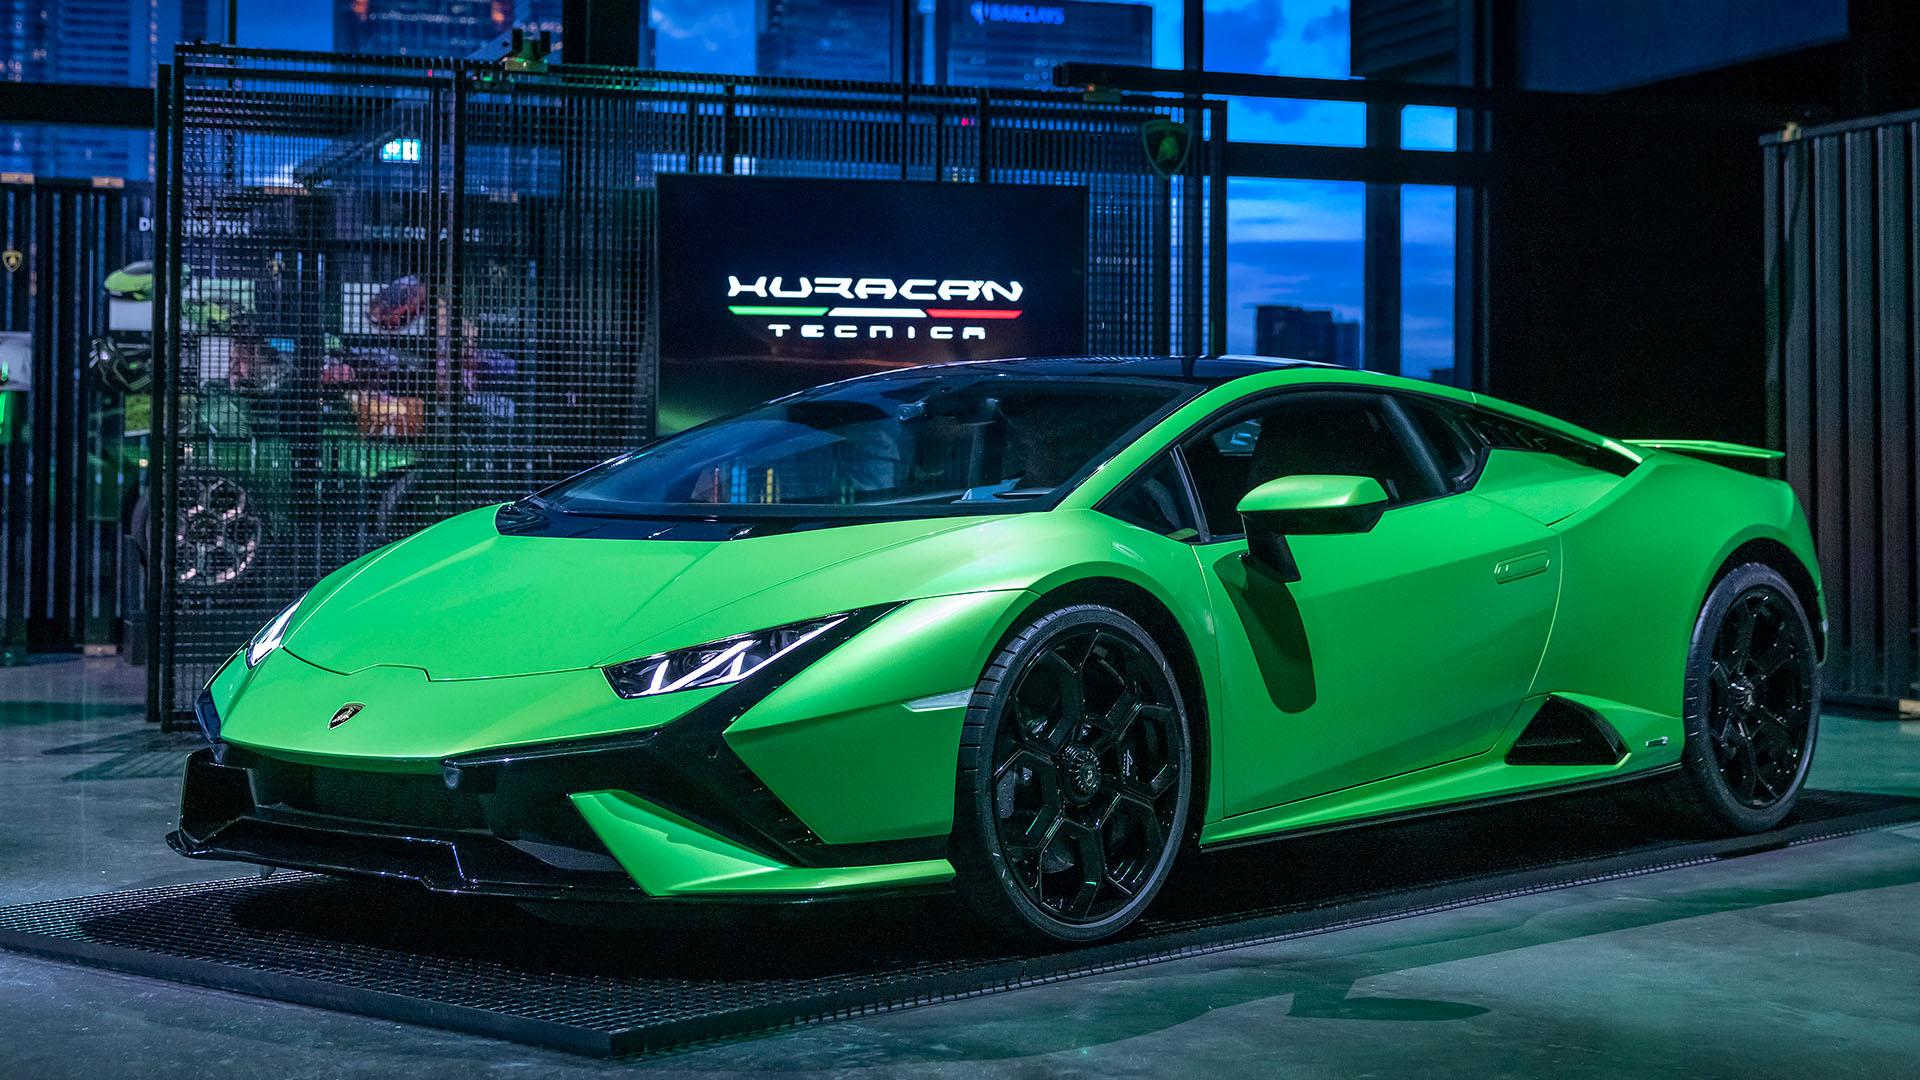 Lamborghini shows the Huracán Tecnica to the public in Europe ... but there  is more - LamboCARS